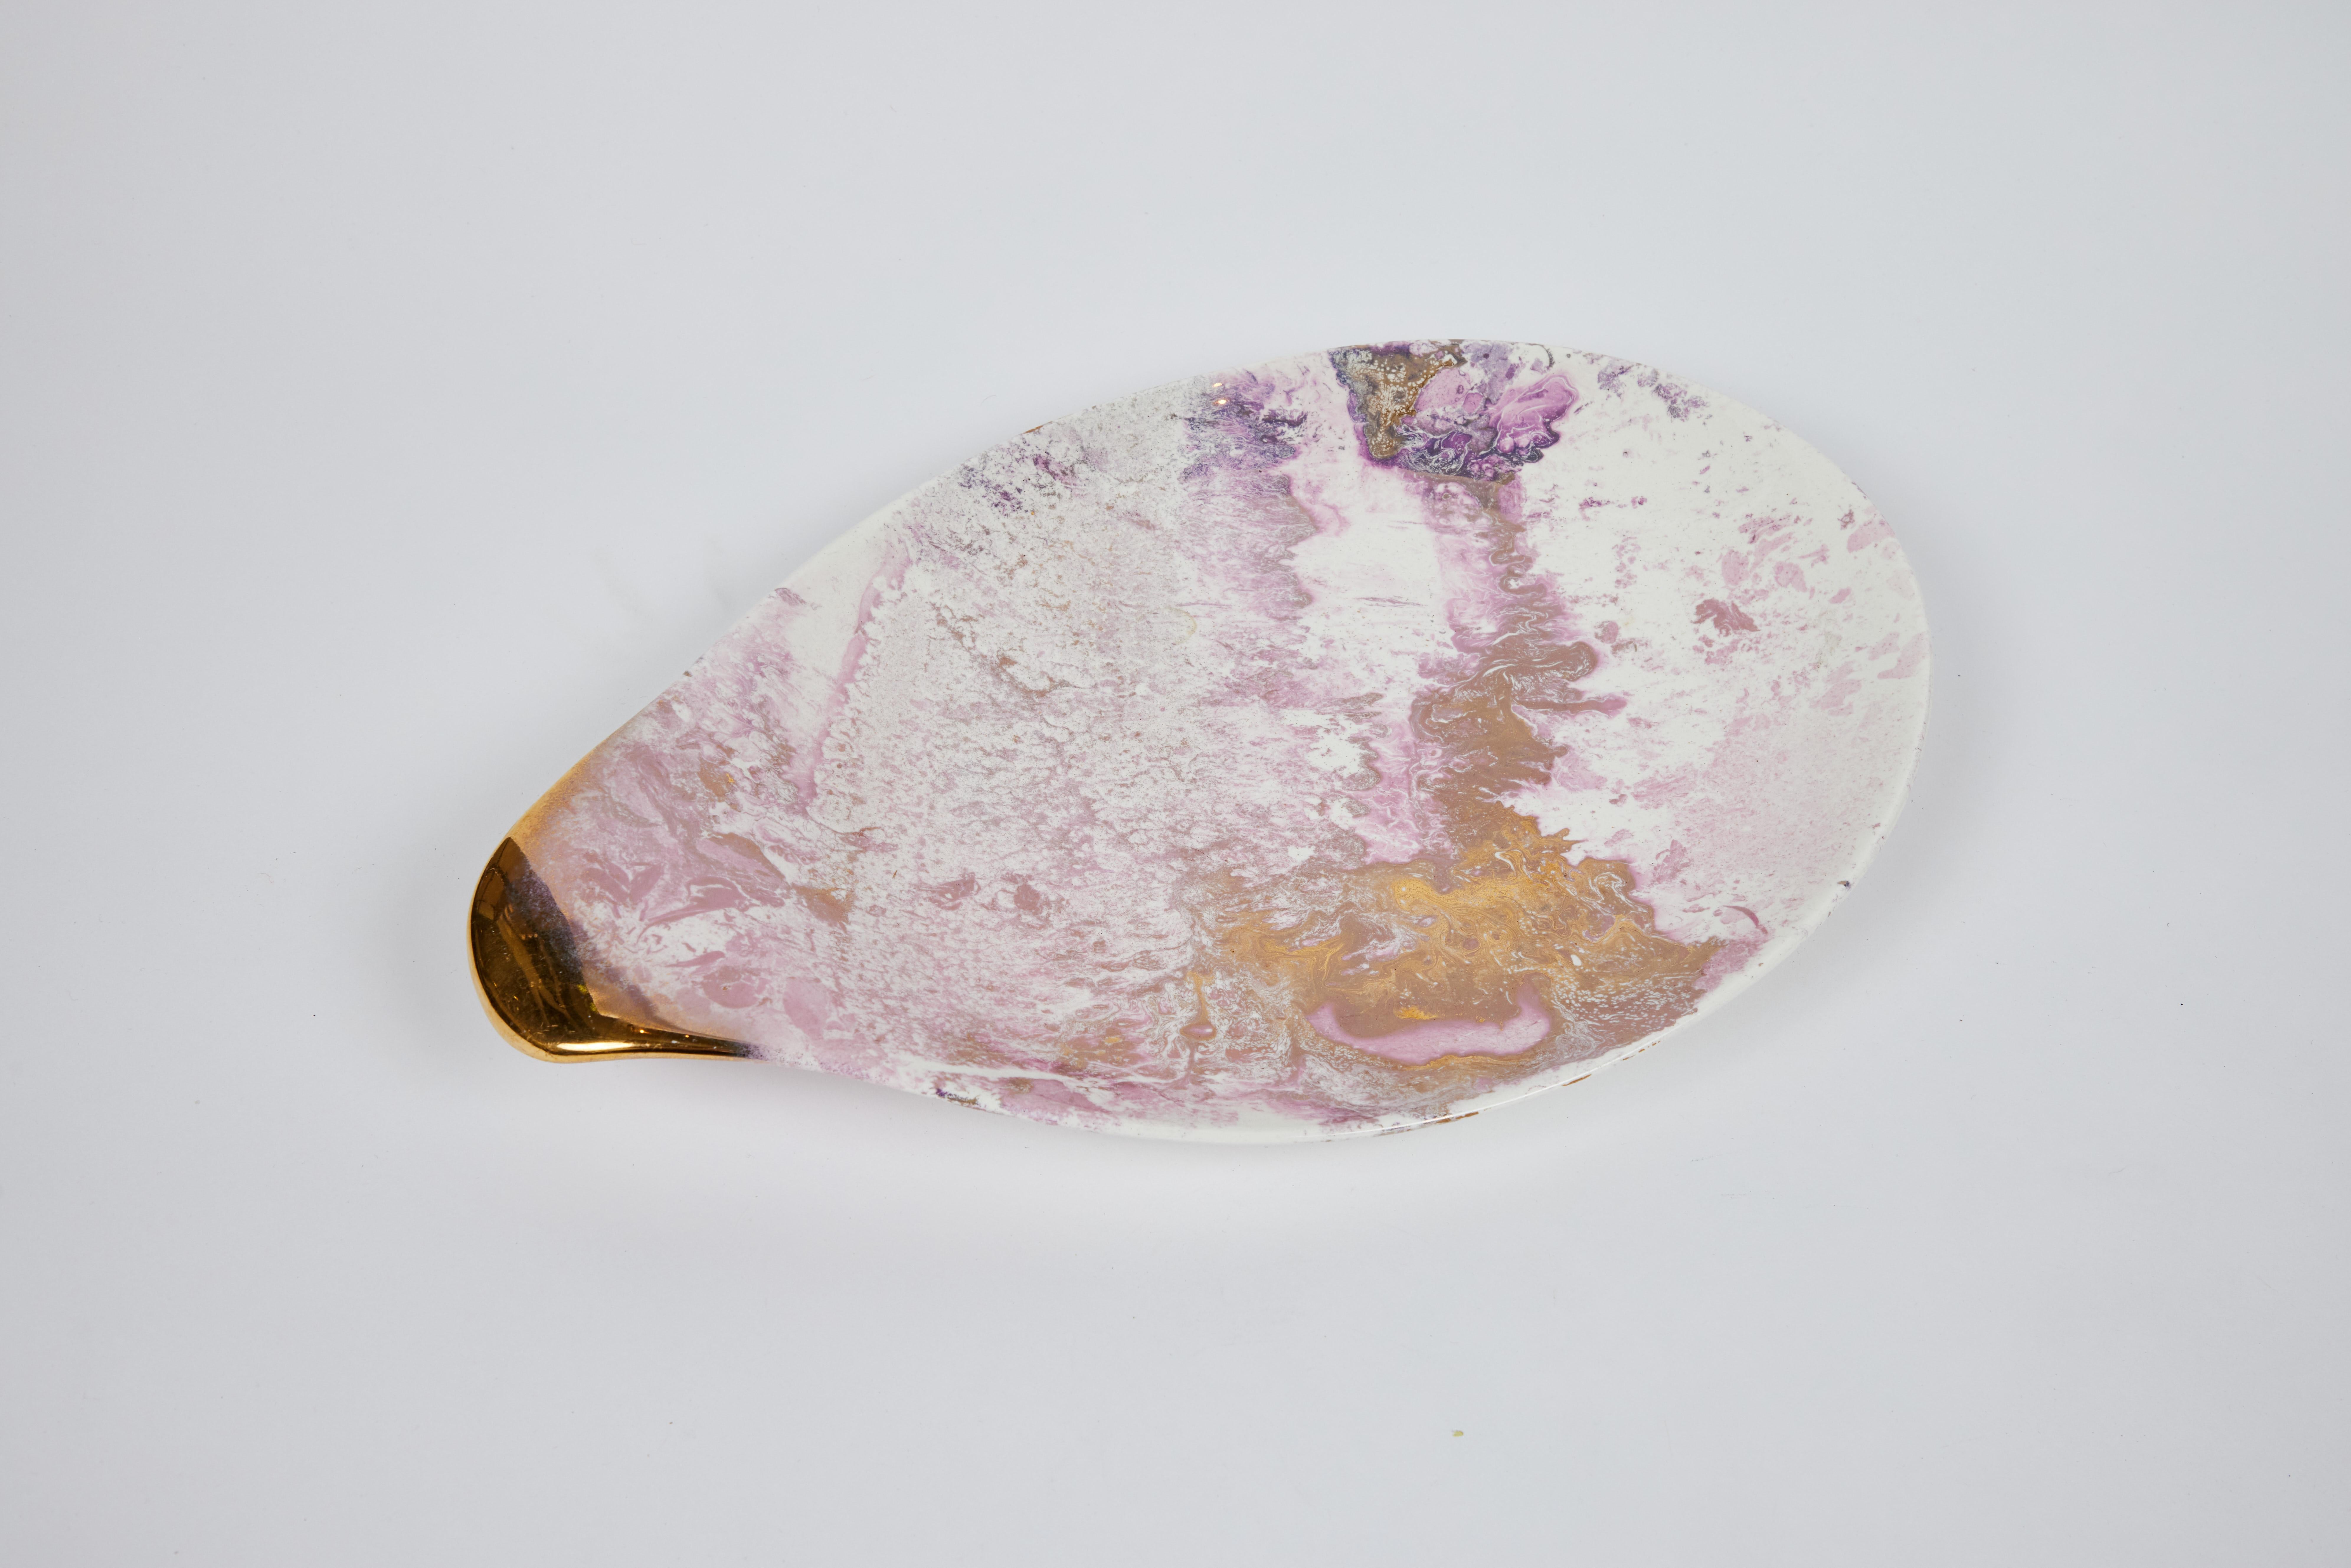 Mid century Dixie Rett (Coral Gables) ceramic dishes are decorated with a mauve pink and gold marbled glaze with a rich luster finish.

Platter: 17